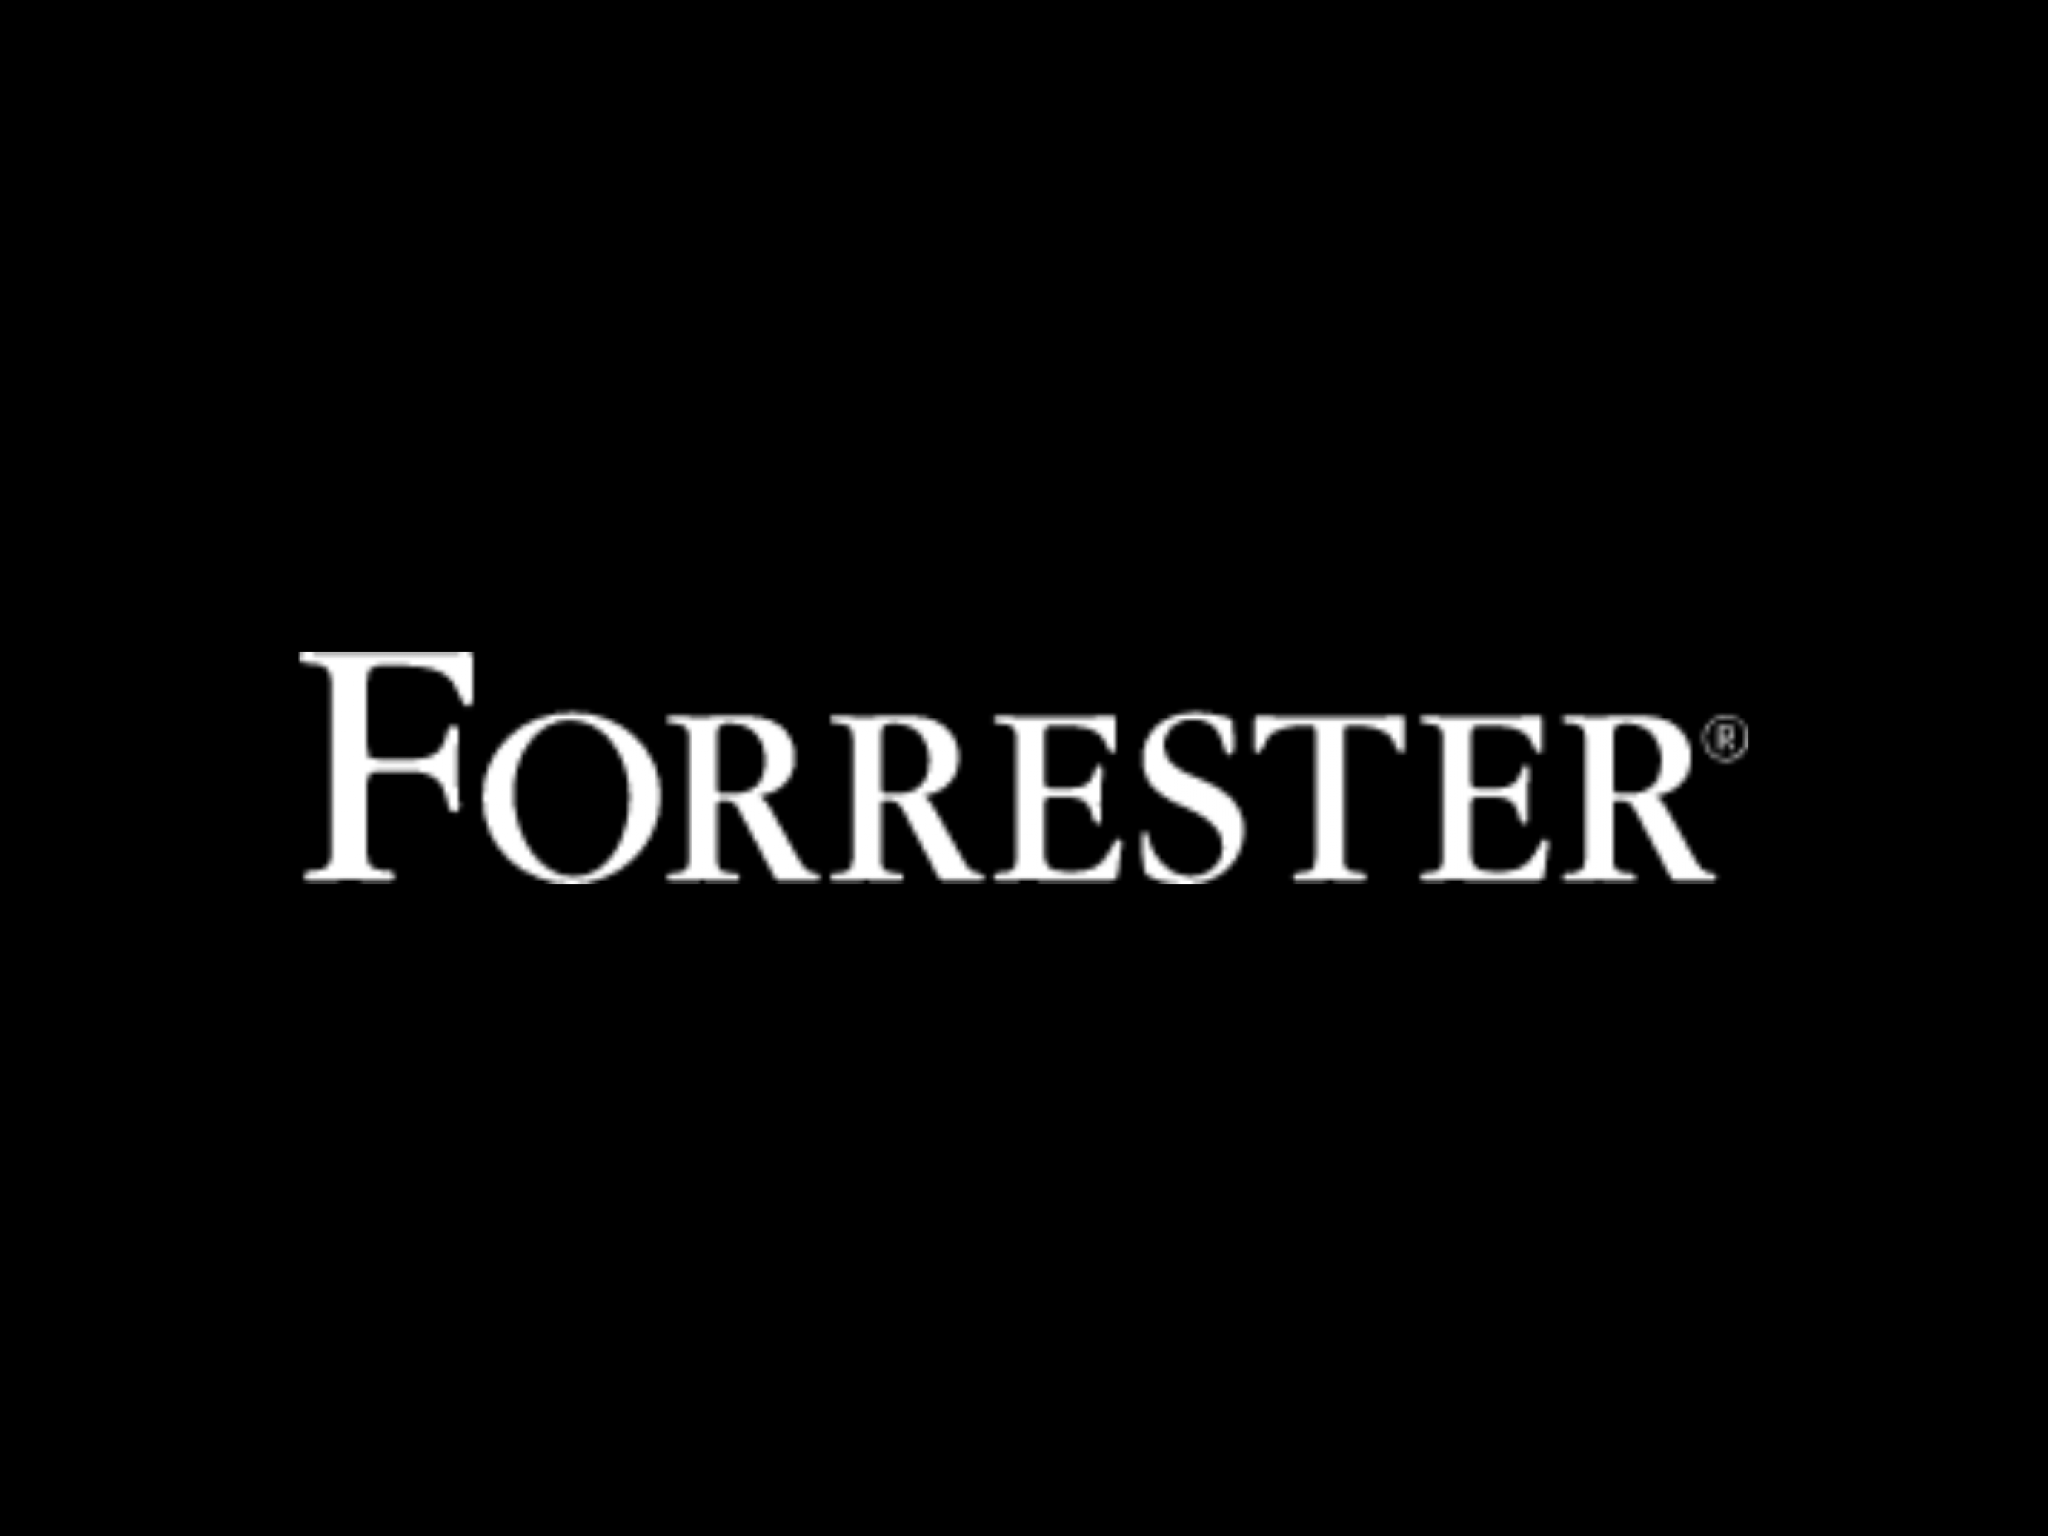  is-forresters-new-research-platform-facing-headwinds-an-analysts-perspective-on-q2-revenue-and-sales-force-improvement 